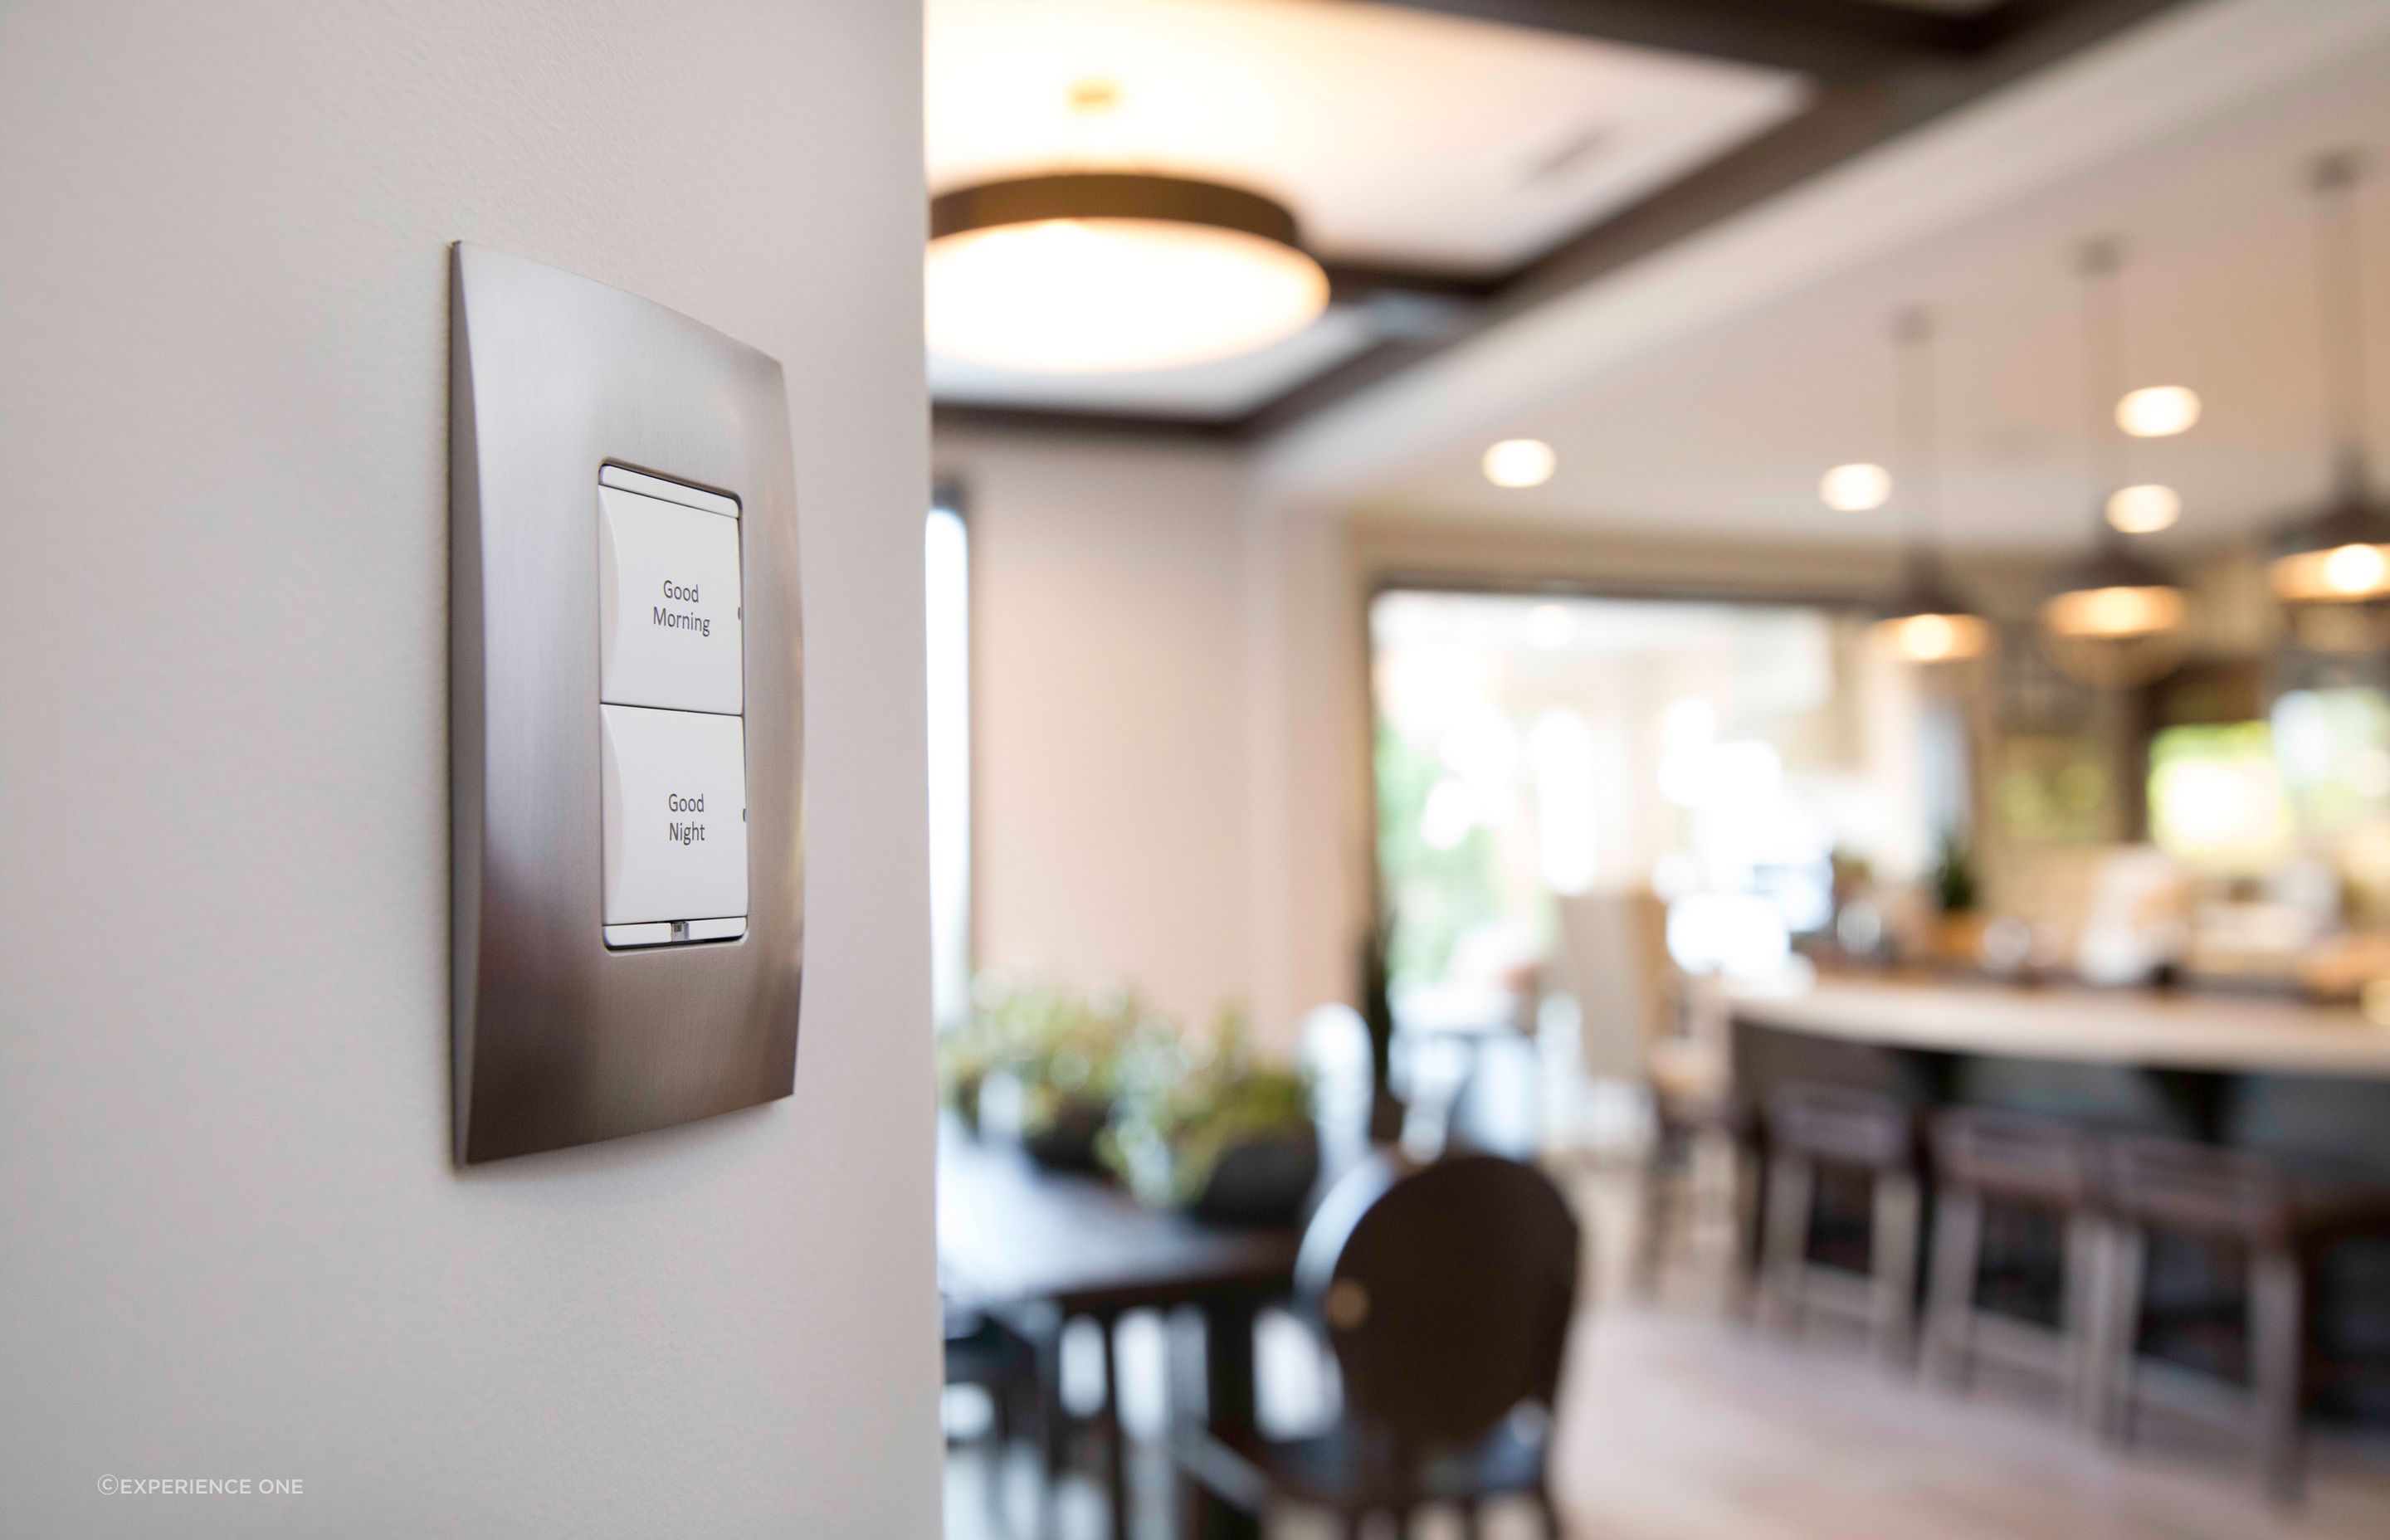 Using motion sensors, smart lighting can automatically turn on when you enter a room, providing convenience and saving energy.